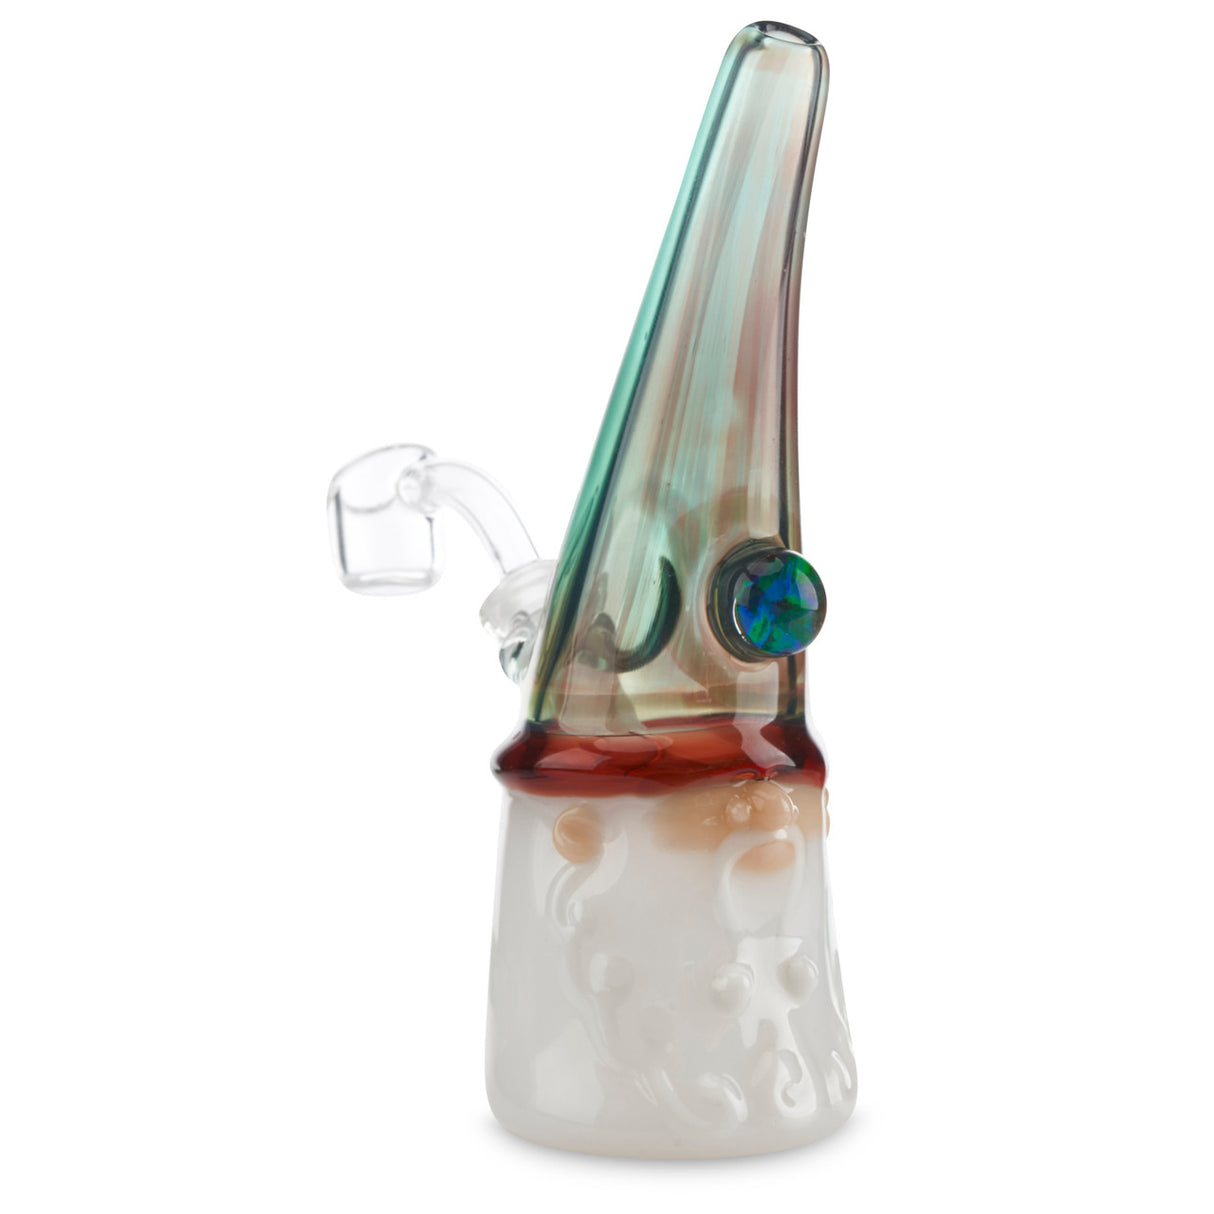 phil siegel jammer red and blue colored dab rig